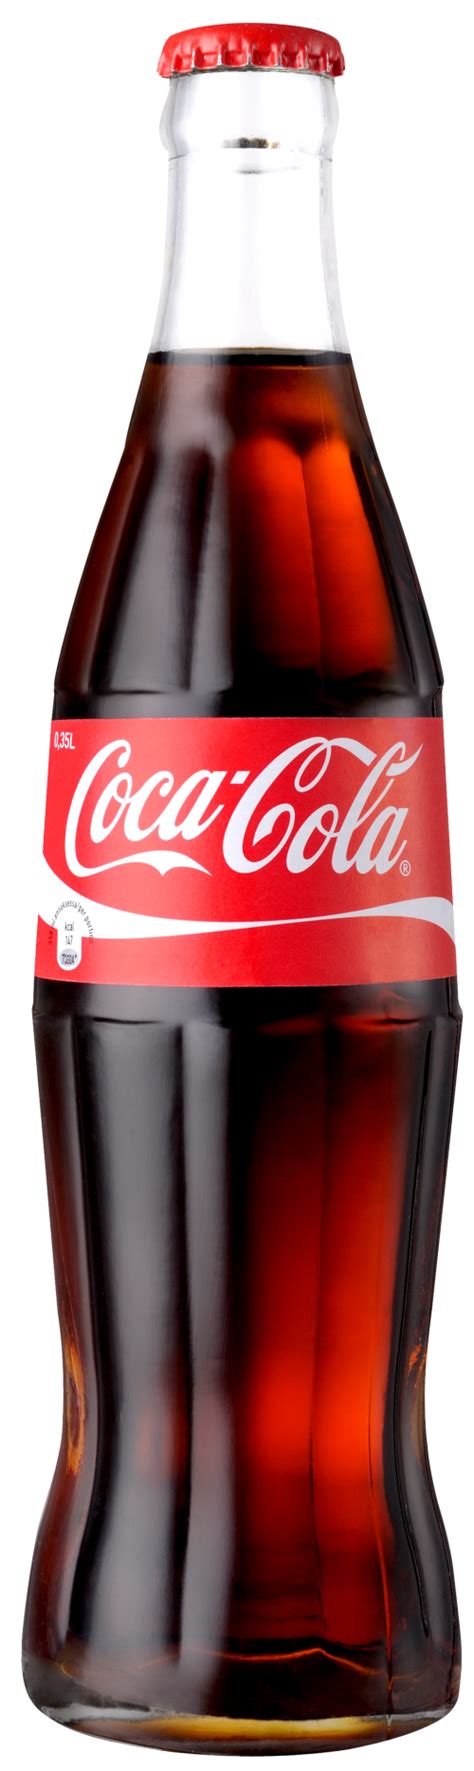 There are various kinds of. Coca Cola PNG image - PngPix